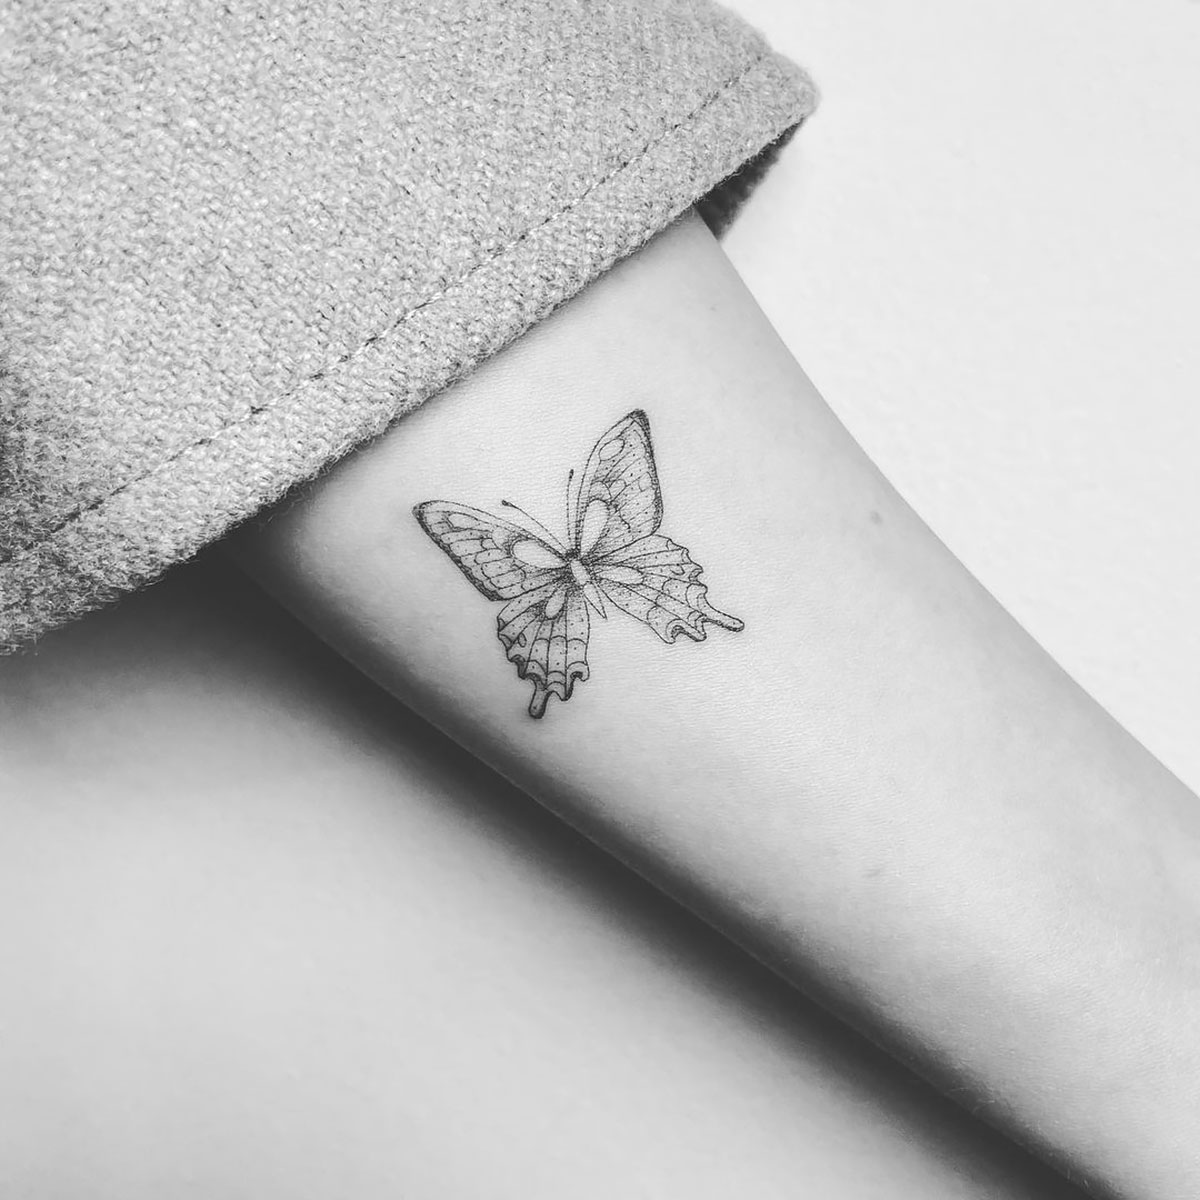 Butterfly 나비소녀  BTS Flower the album cover tattoo Isnt  Facebook